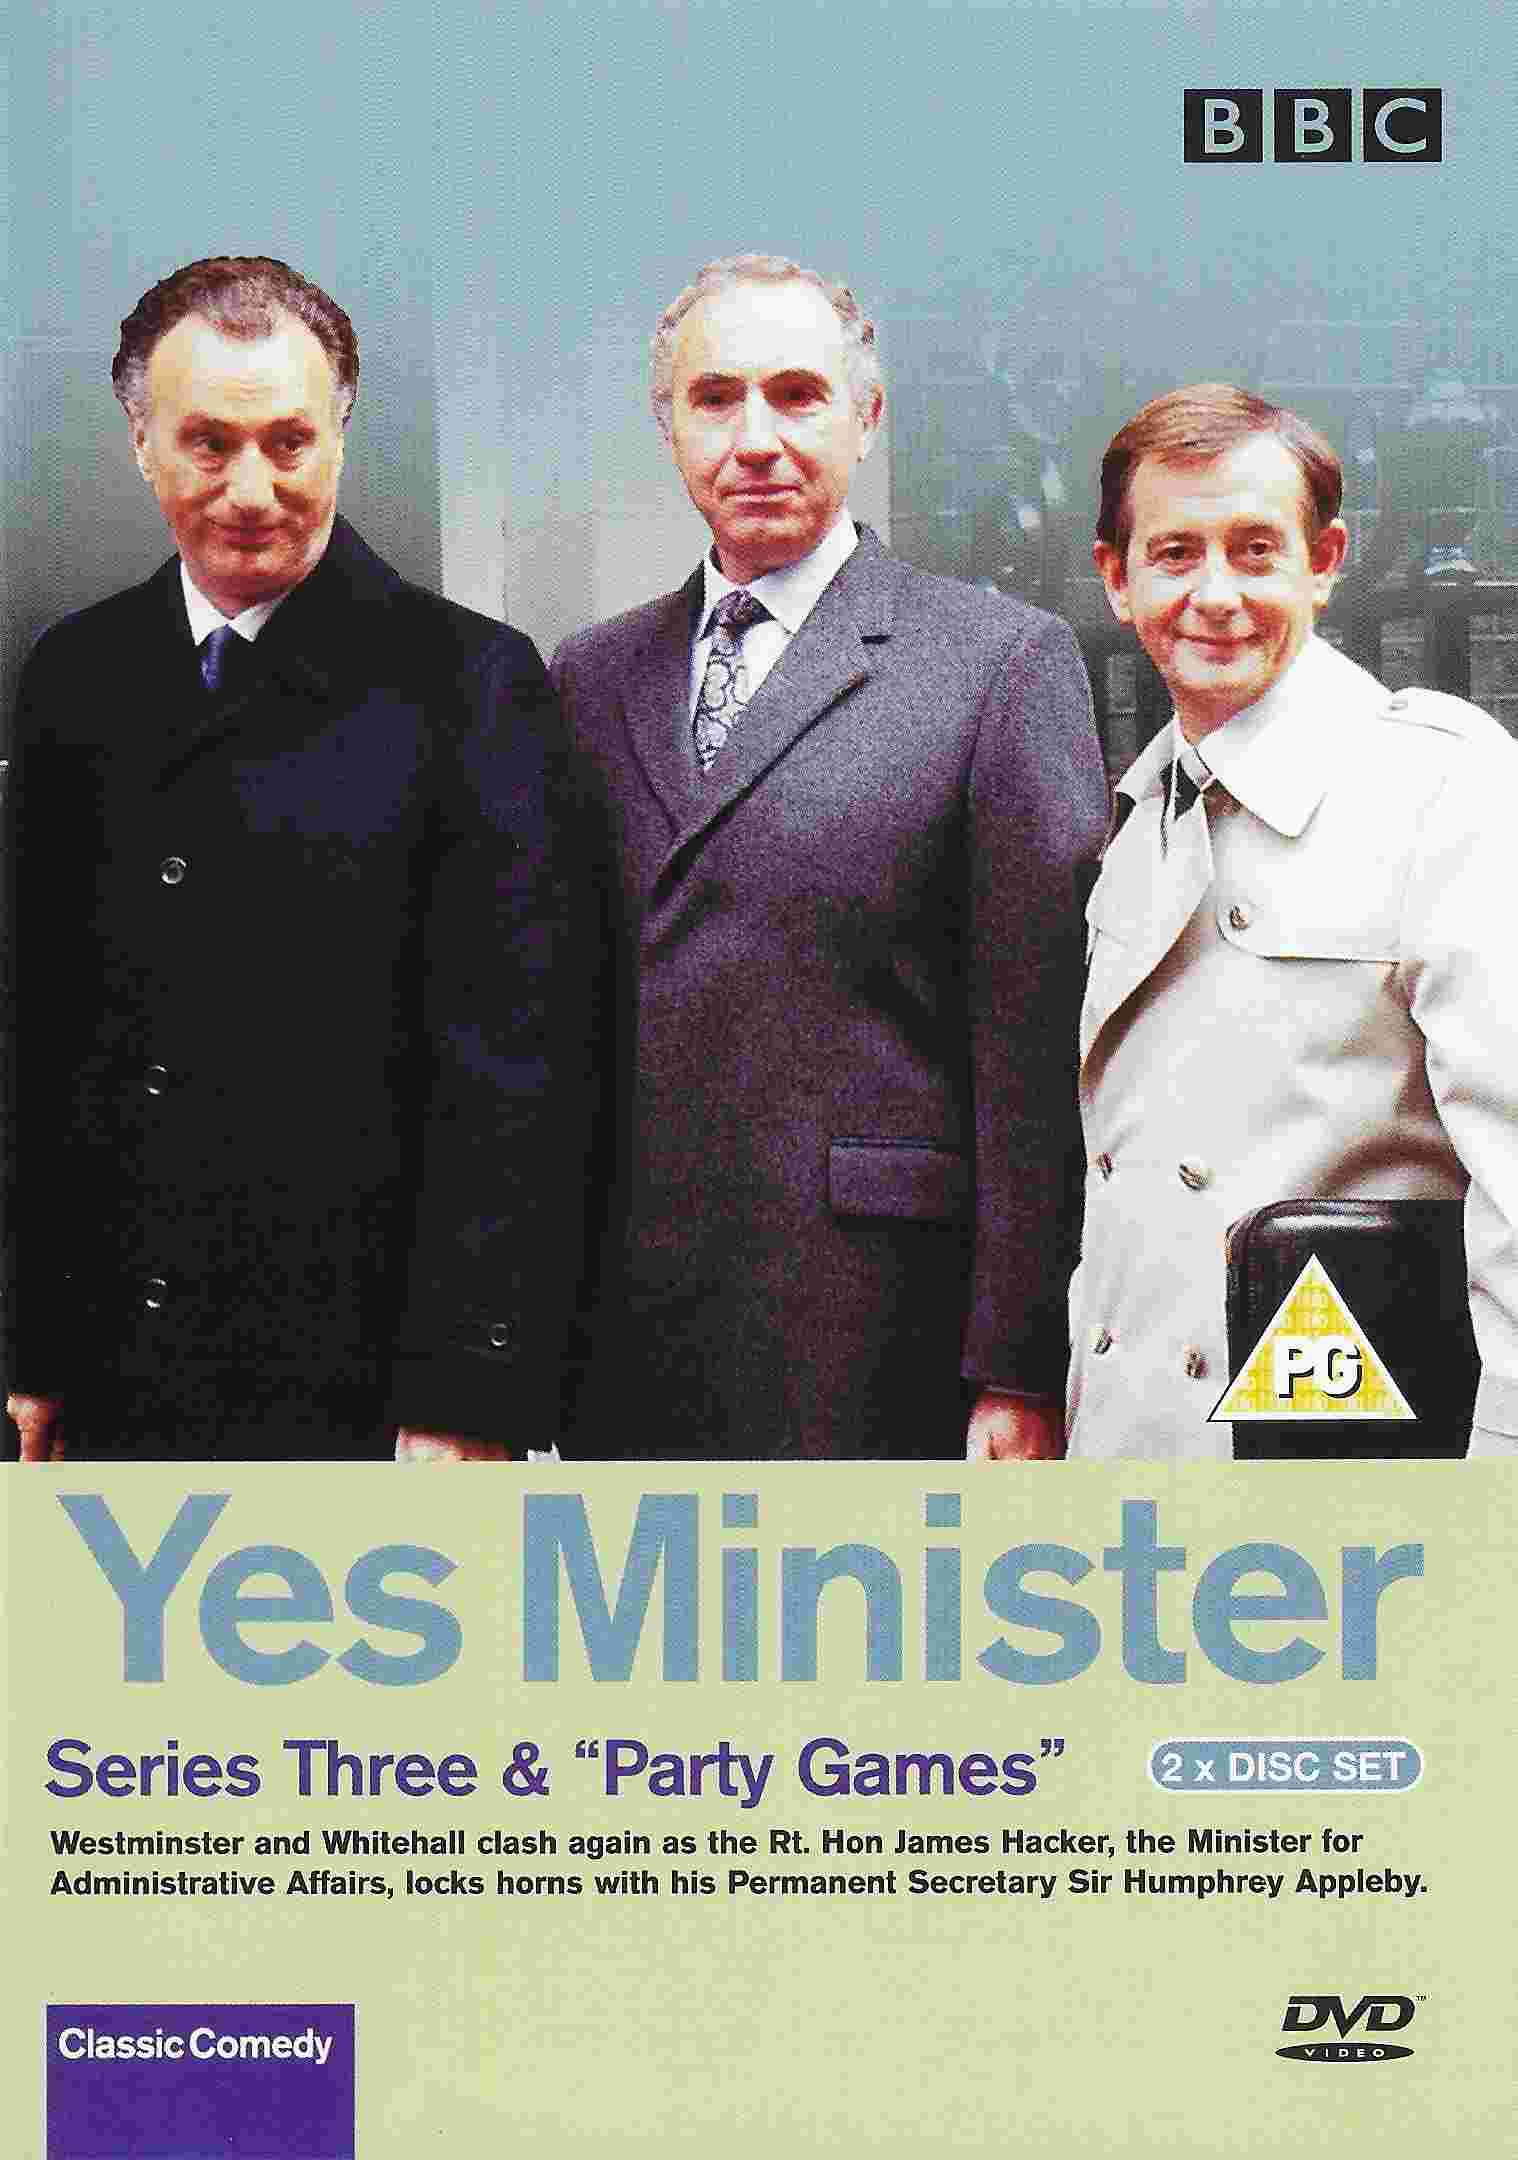 Picture of BBCDVD 1188 Yes Minister - Series Three by artist Antony Jay / Jonathan Lynn from the BBC records and Tapes library